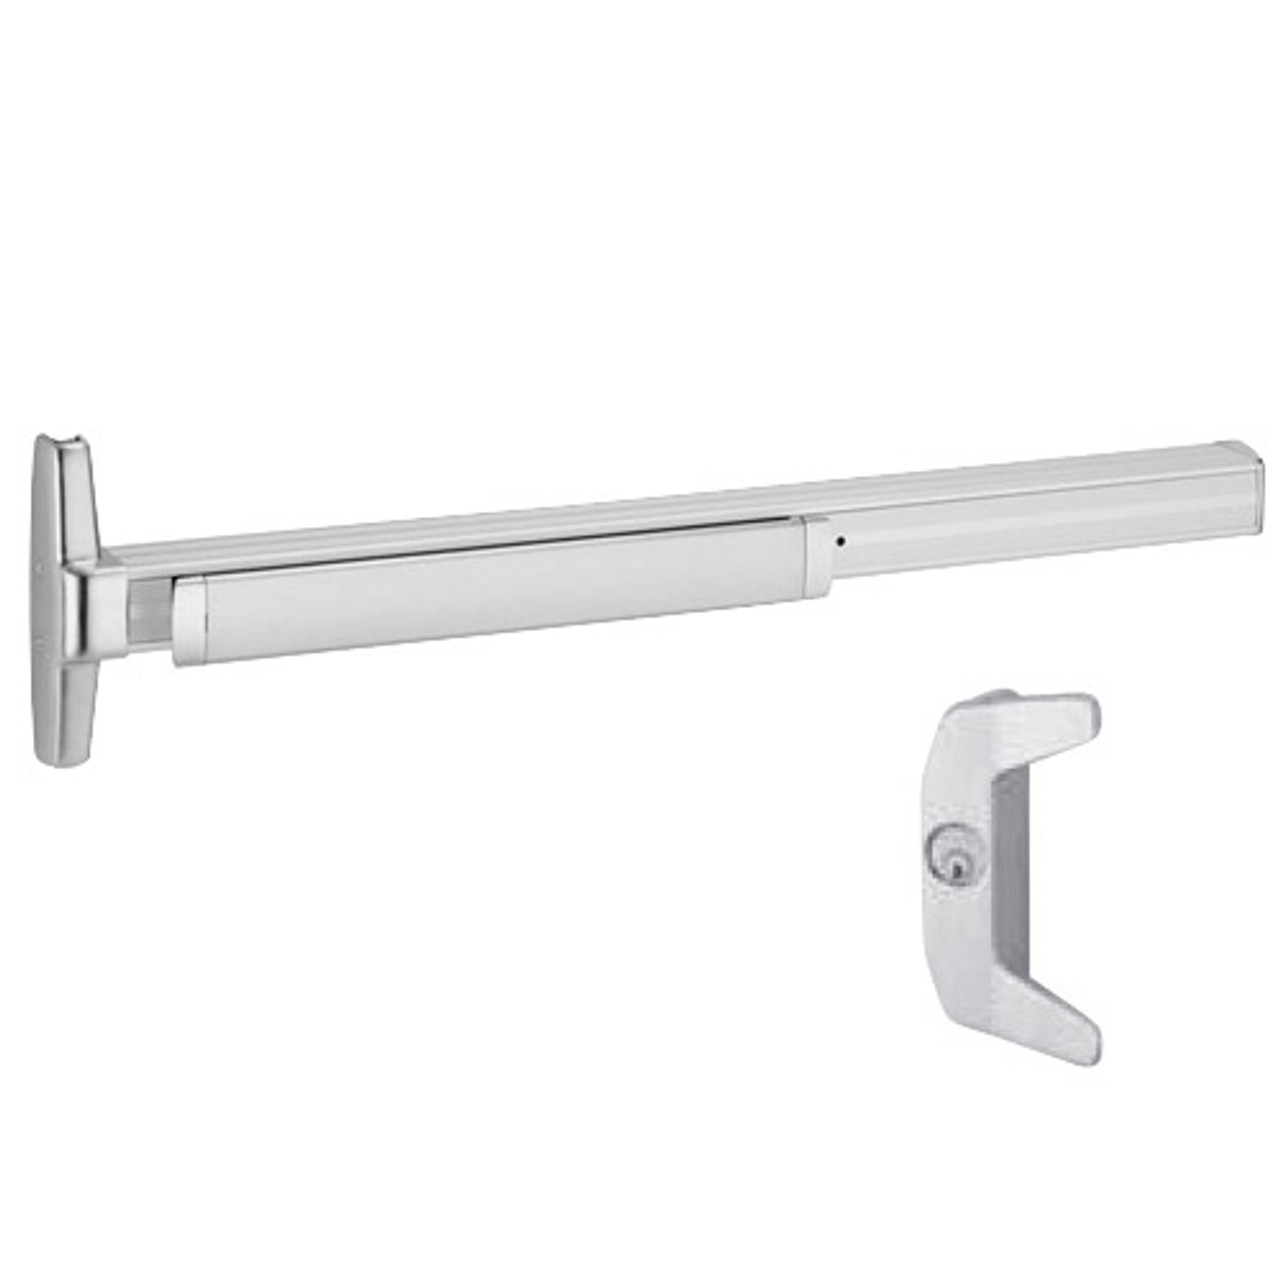 3348A-NL-LHR-F-US28-4 Von Duprin Exit Device in Anodized Aluminum